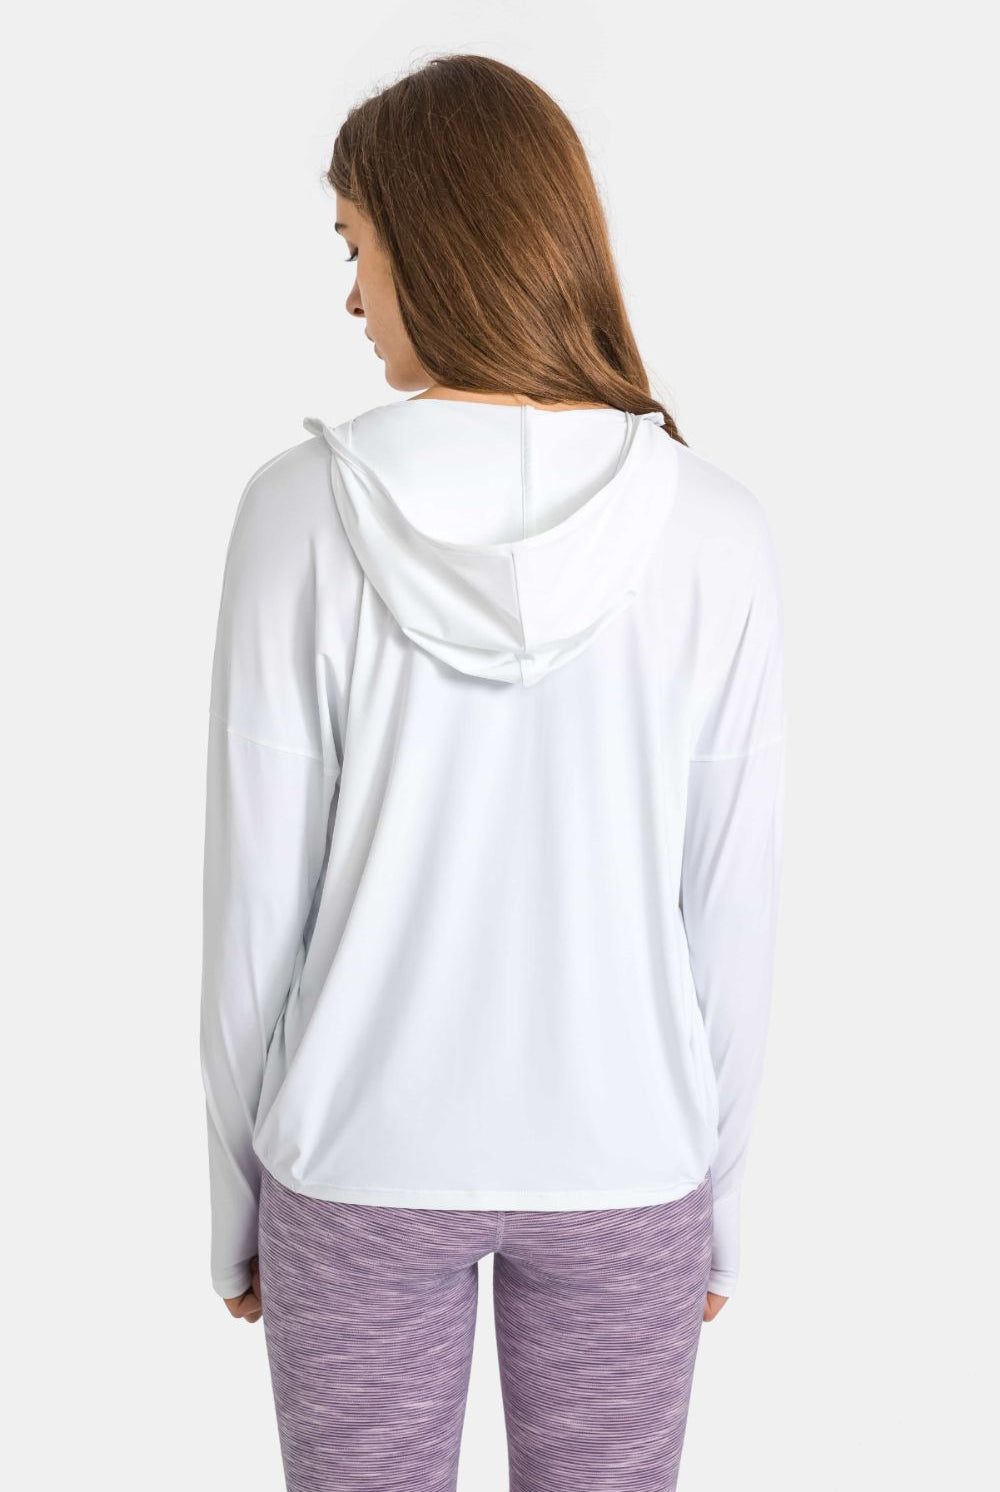 White Smoke Sweat Now Shine Later Zip Up Dropped Shoulder Hooded Sports Jacket activewear